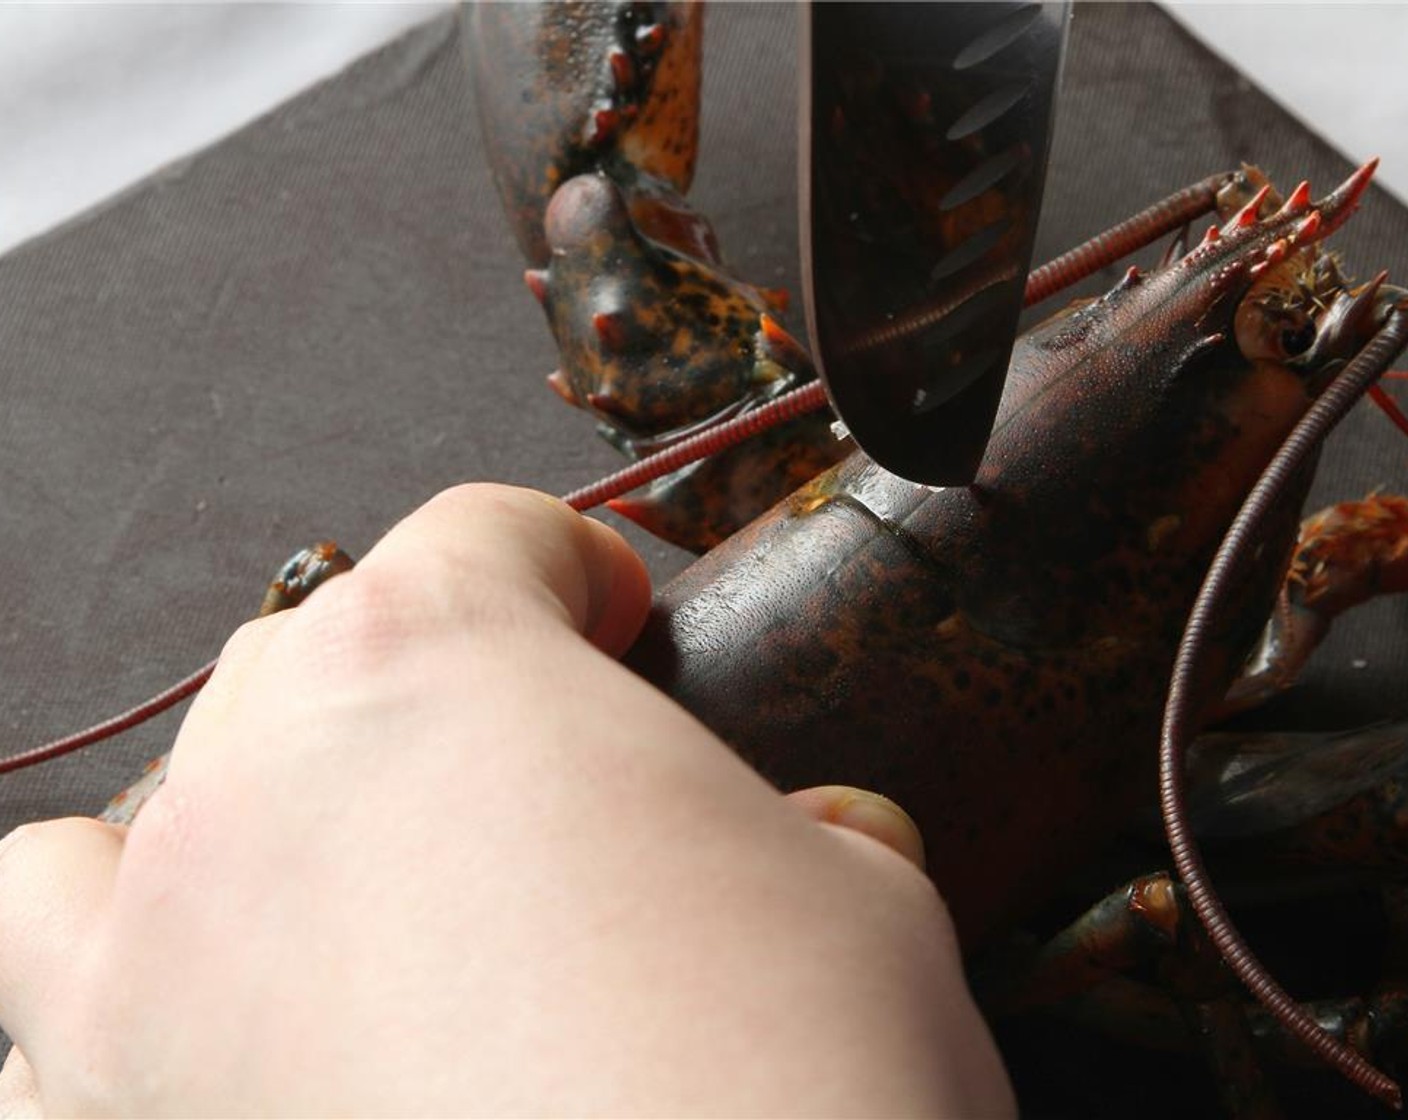 step 1 First, make an incision in the Lobster (1) head.